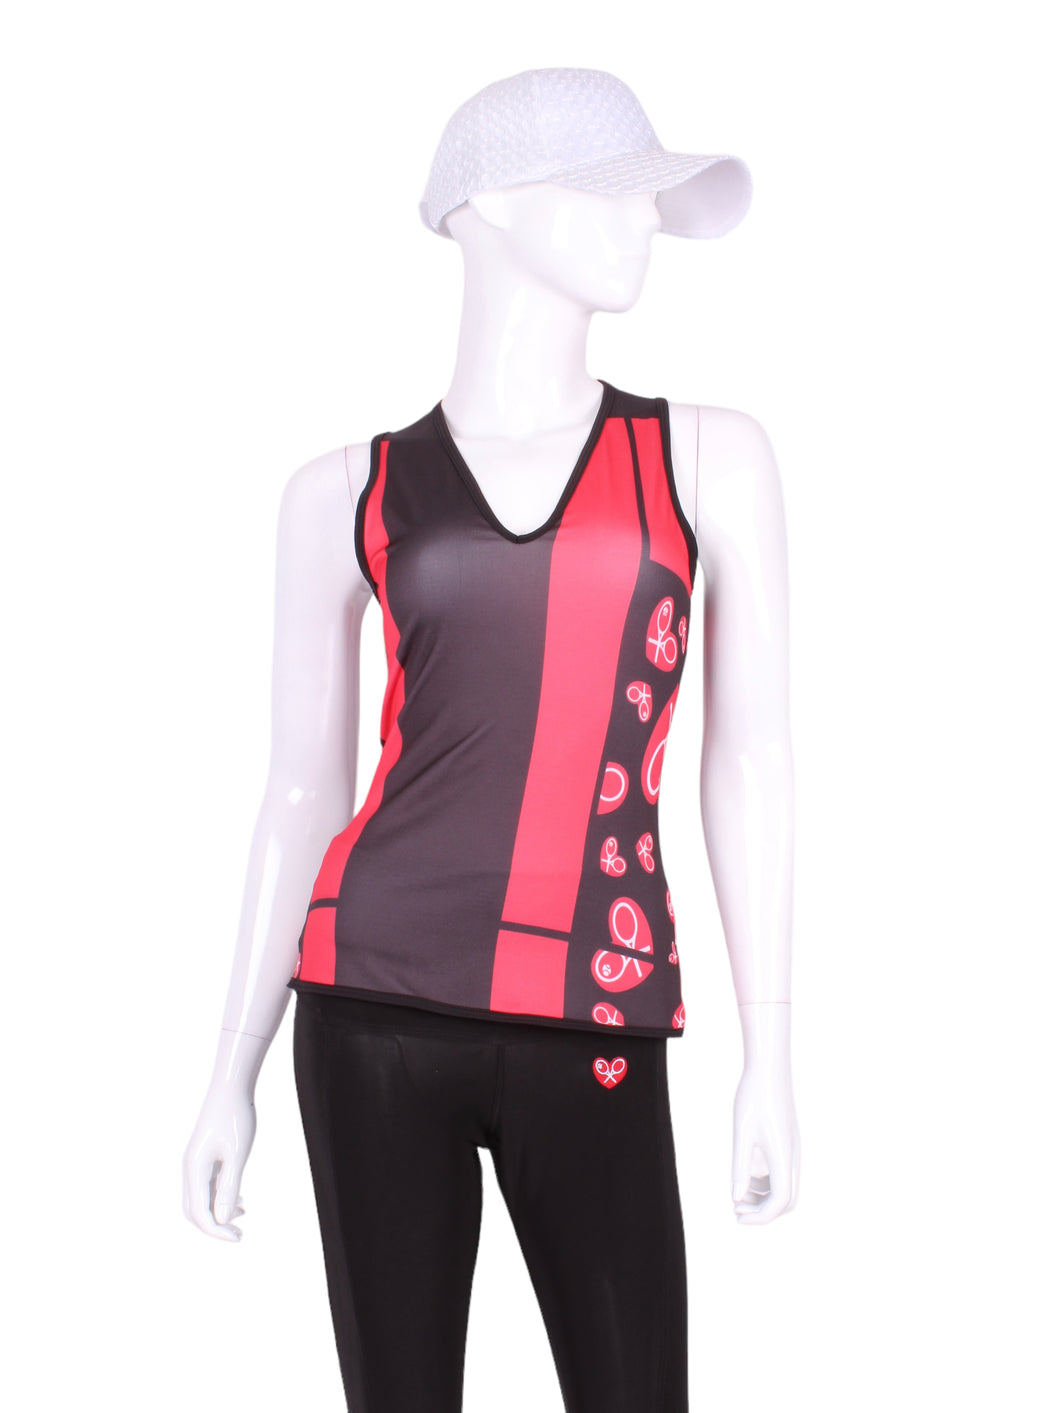 A fun tennis tank top - Mondrian. Cold water wash and quick-drying breathable fabric.  Vee front and tee back with two-needle cover stitches at each seam. 